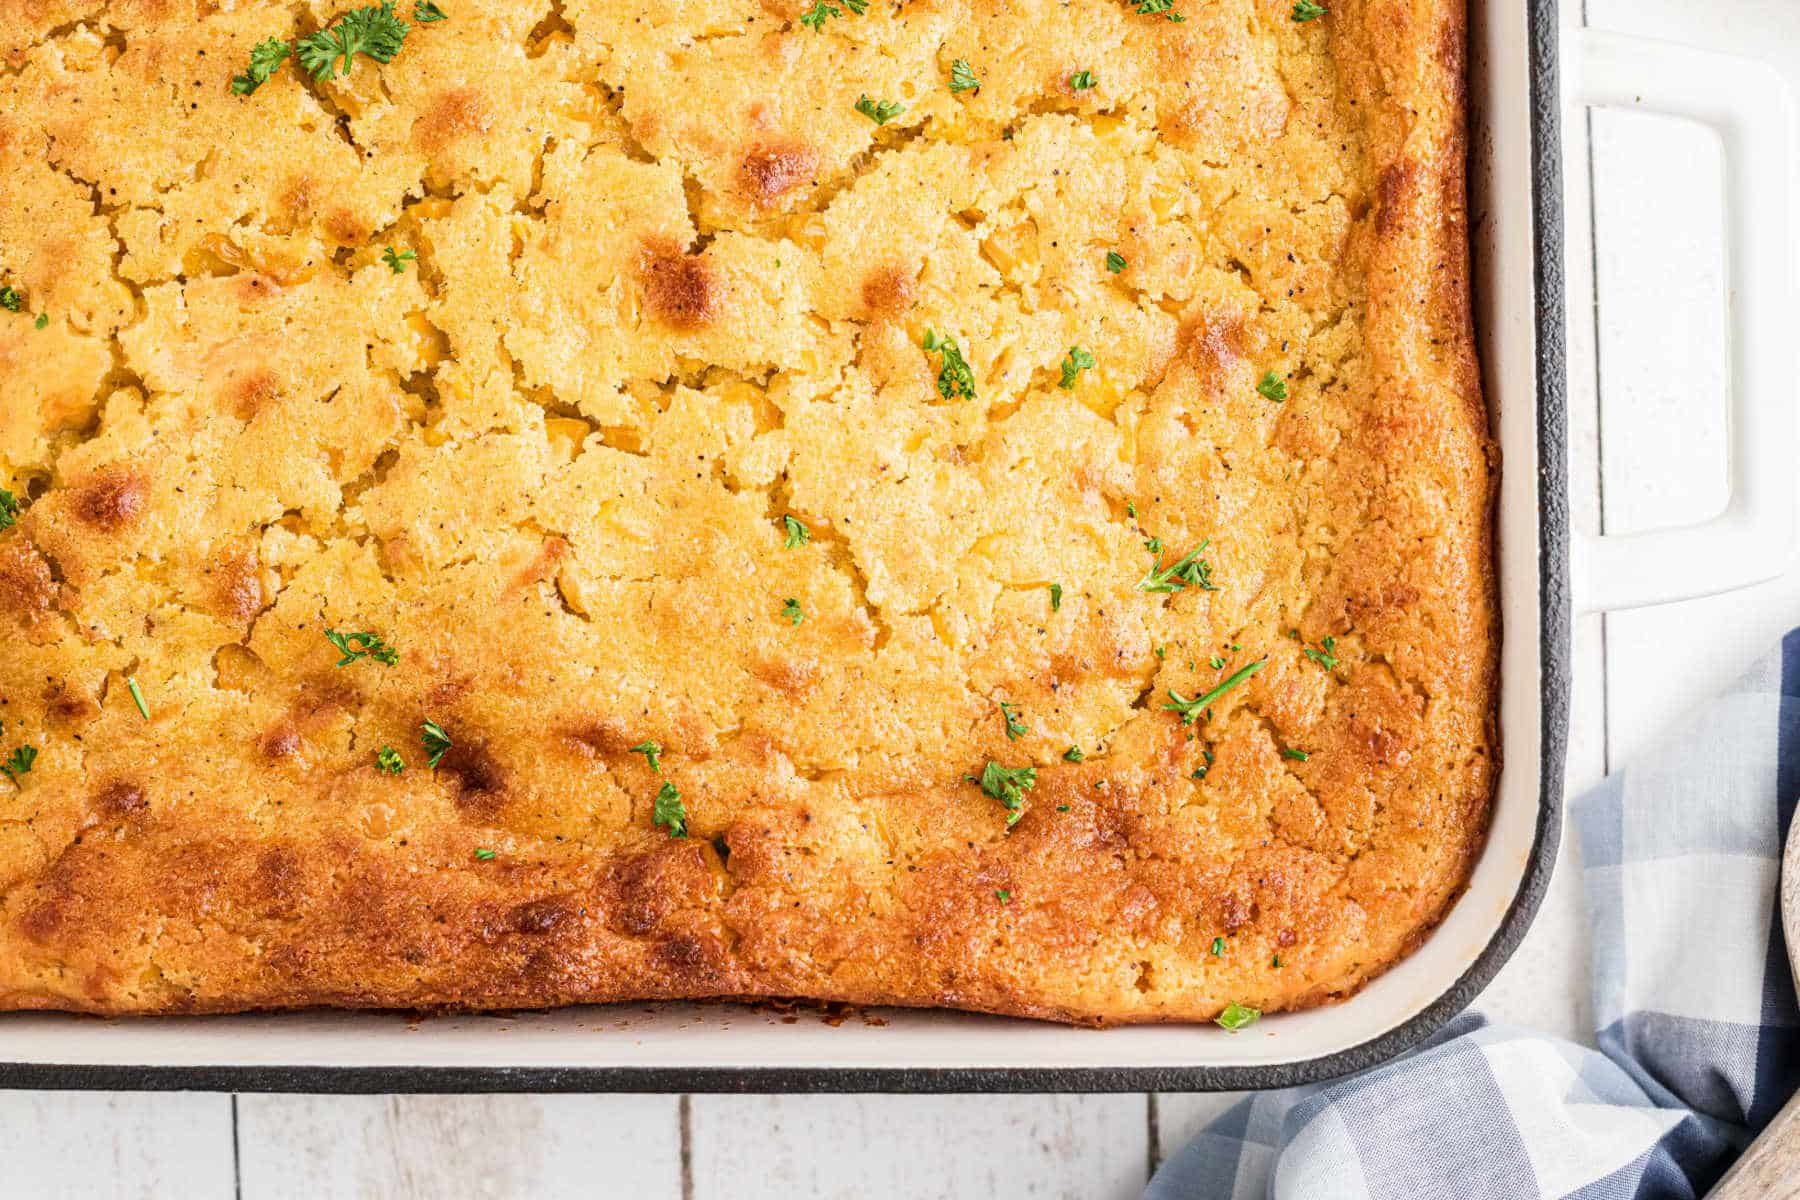 Overhead shot of a dish full of cornbread pudding, just the corner photographed.